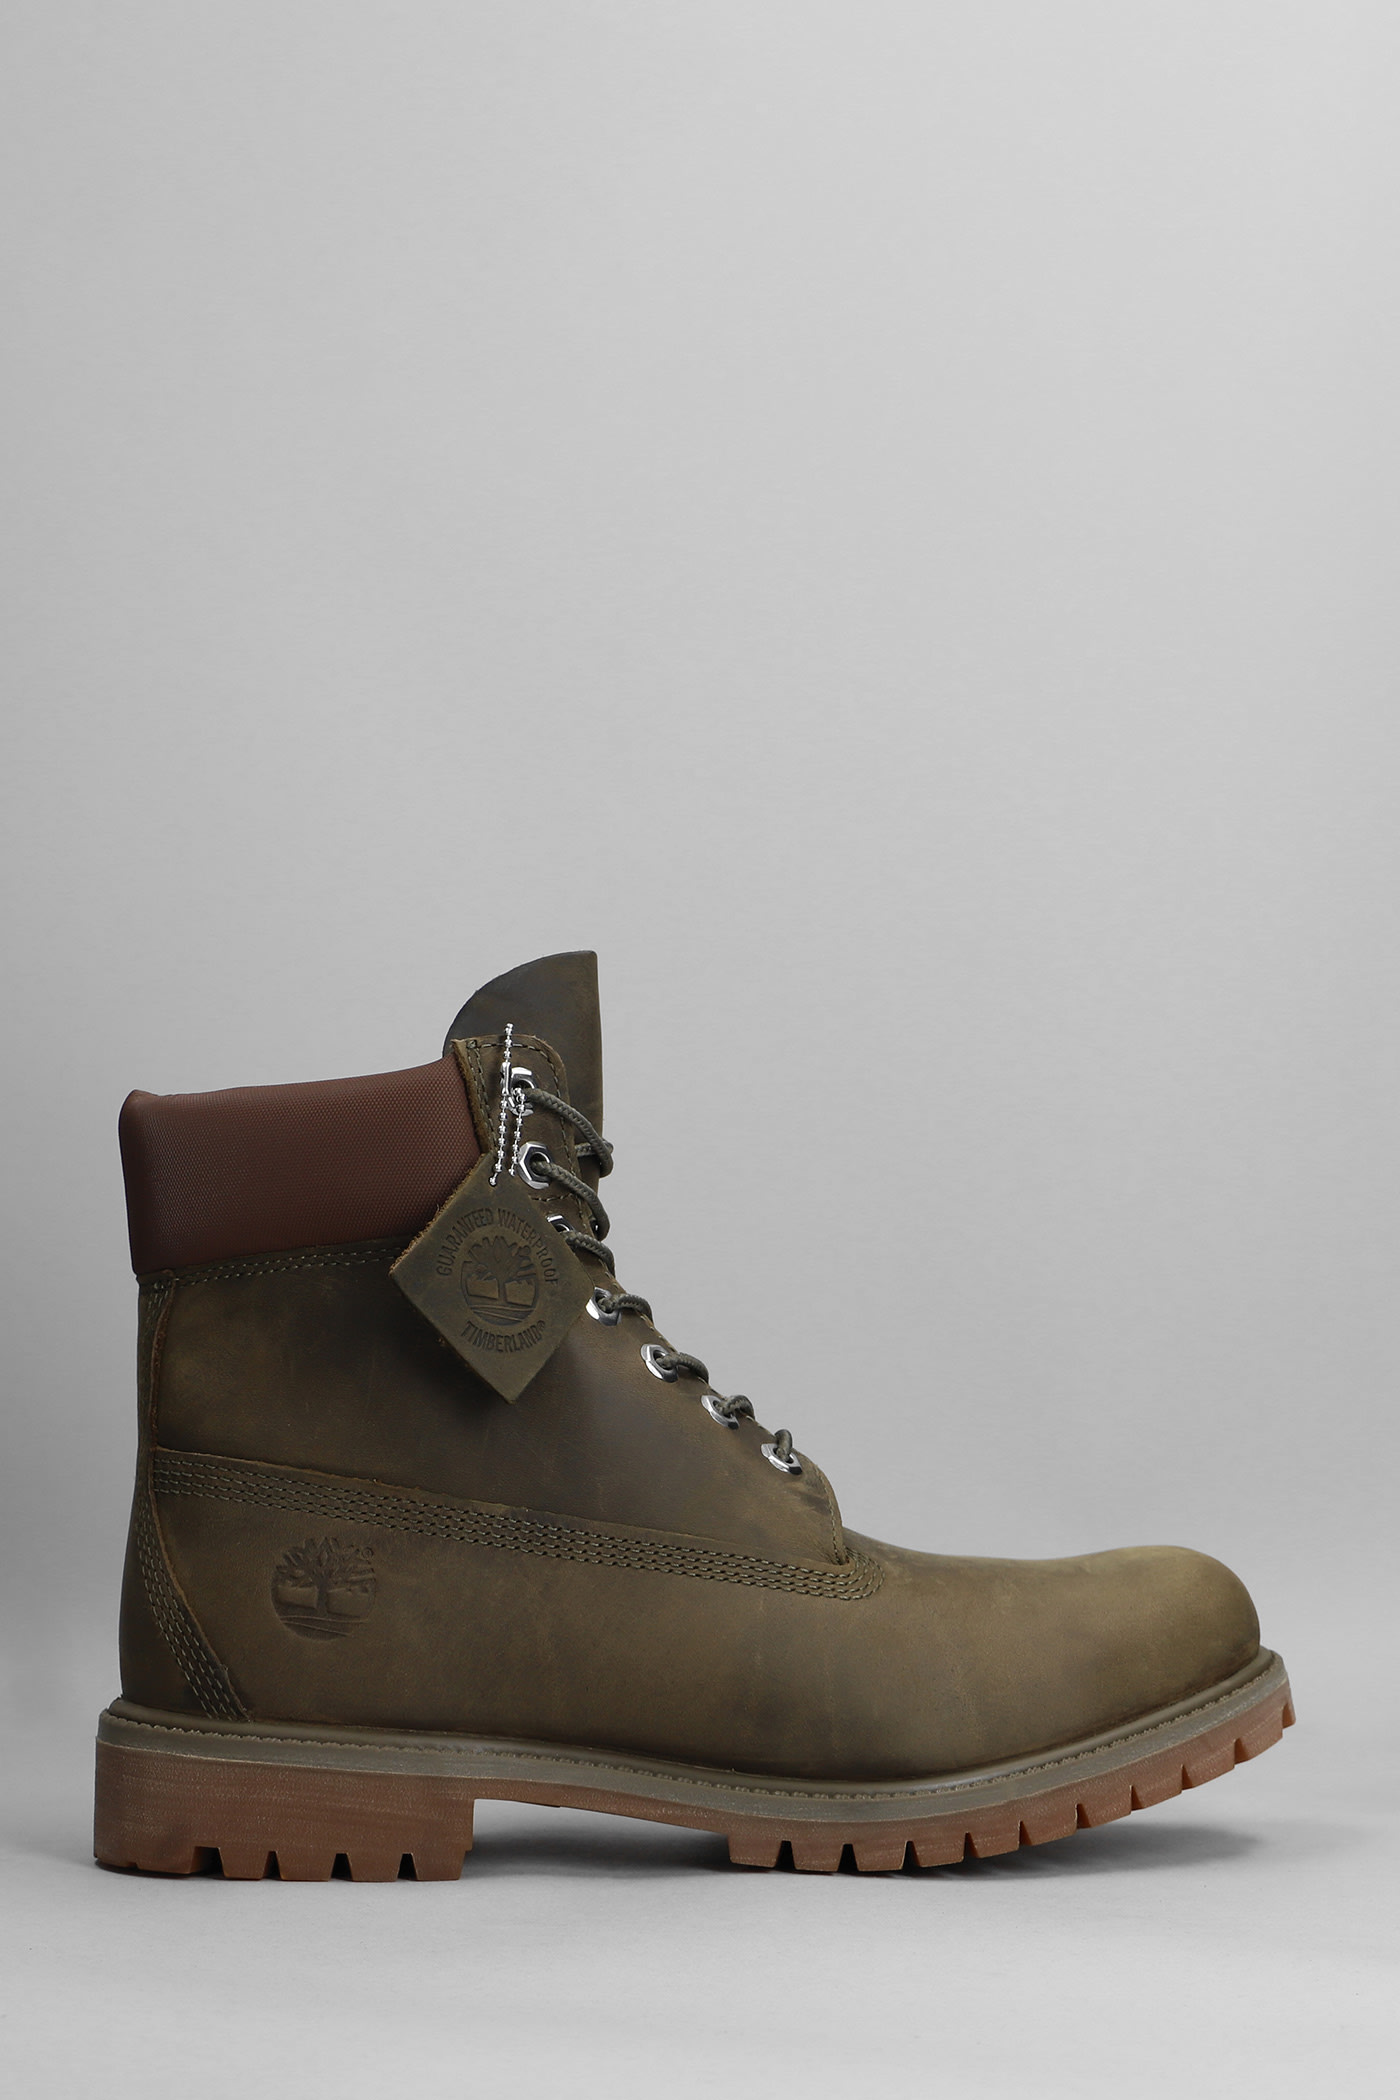 Timberland 6 Prem Bt Combat Boots In Green Leather